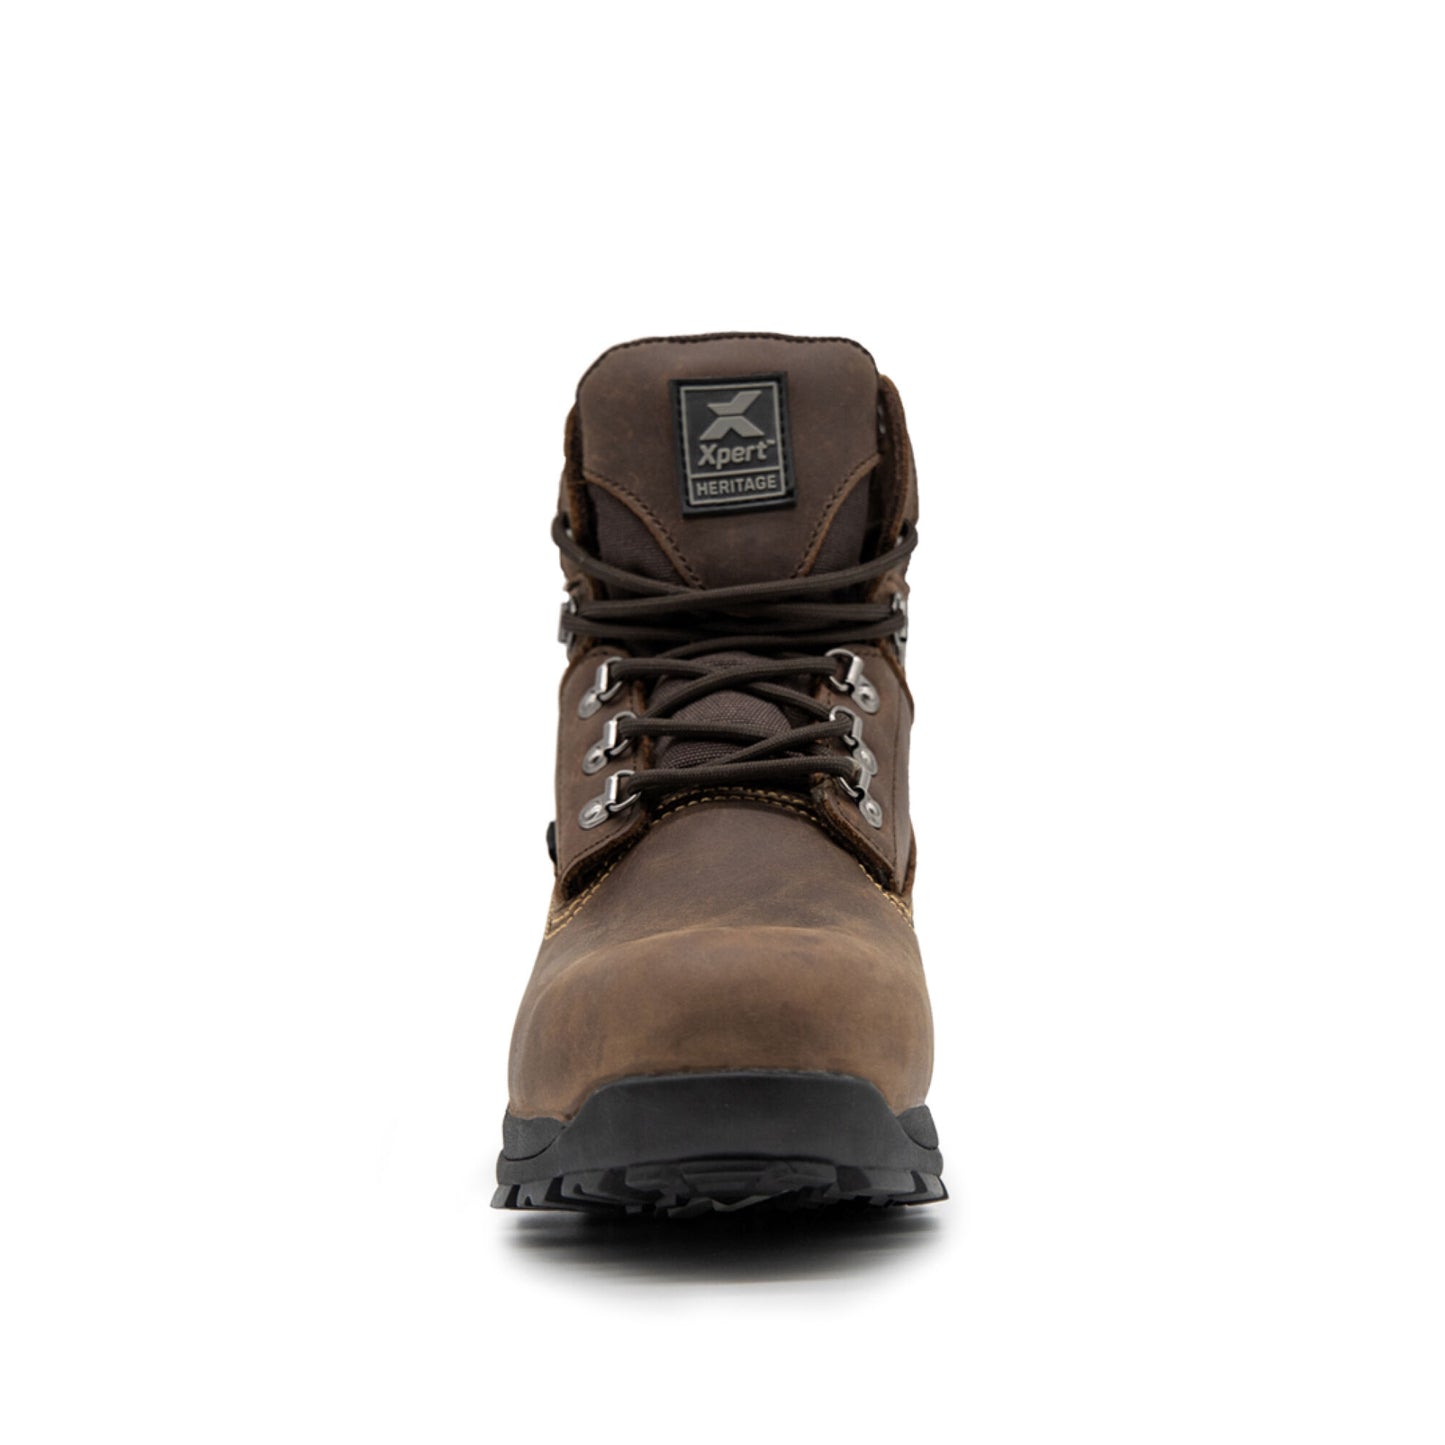 Xpert Heritage Legend S3 Safety Boot - Brown